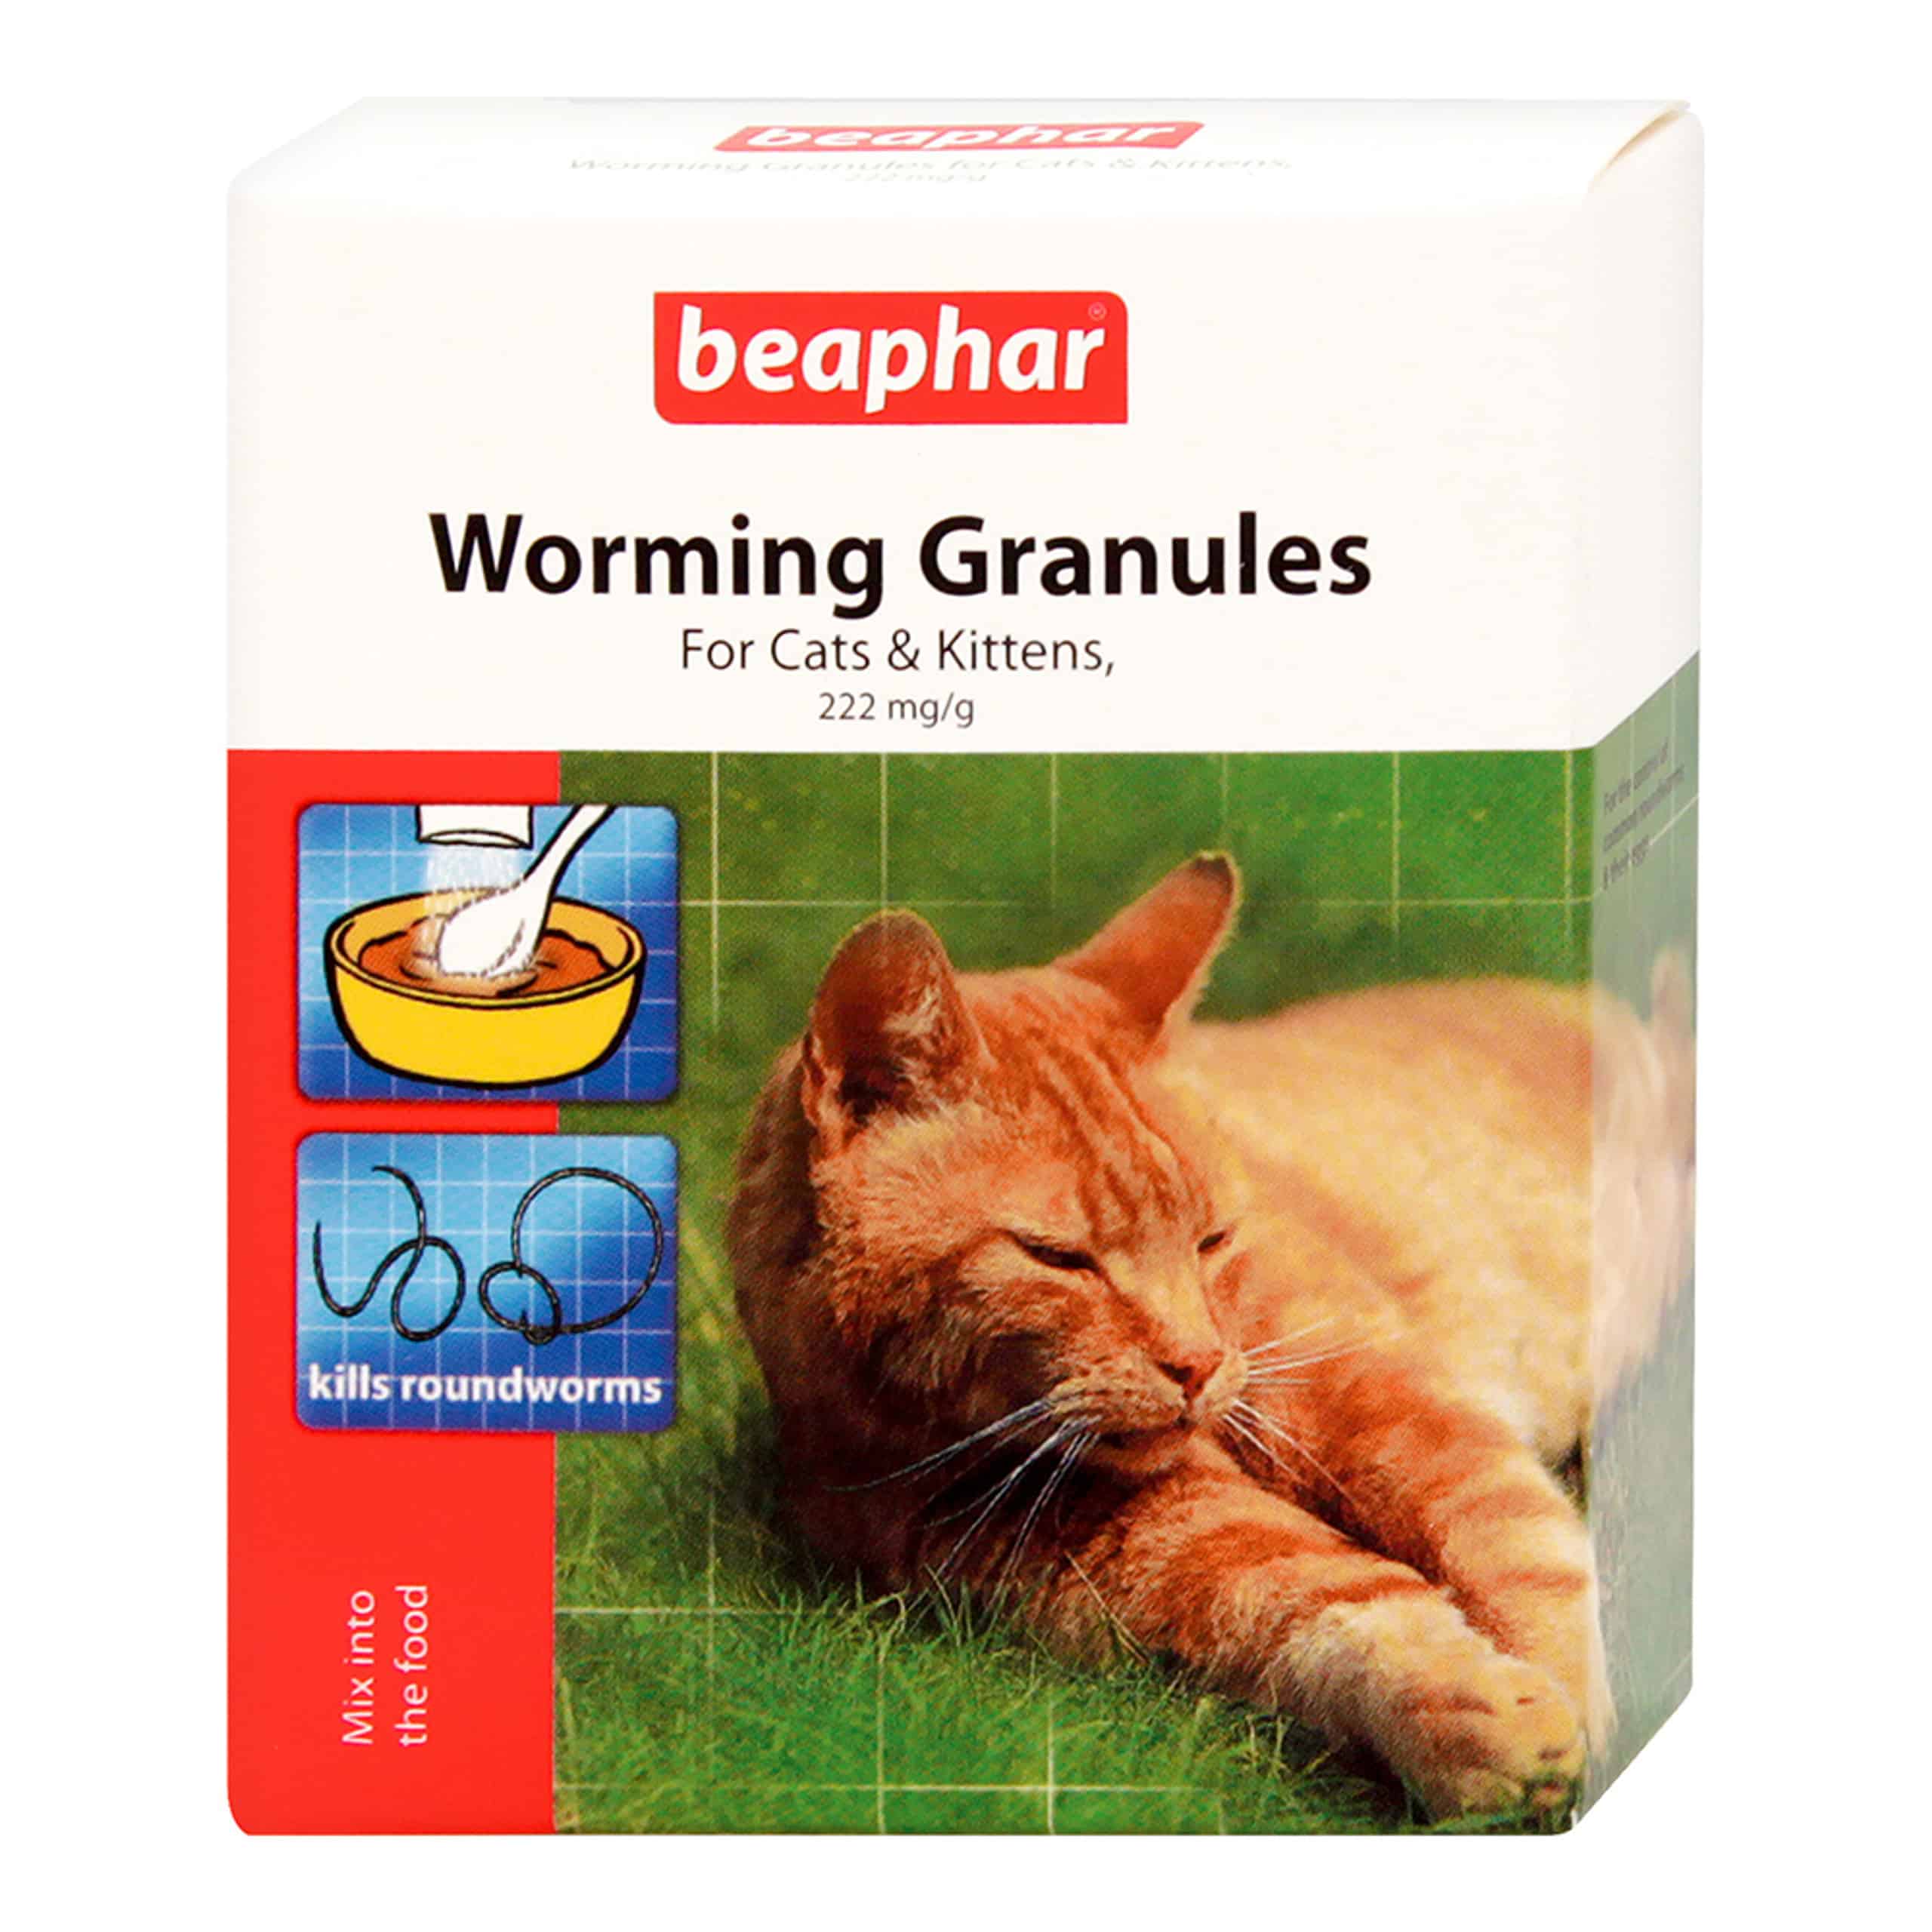 Beaphar Worming Granules for Cats and Kittens